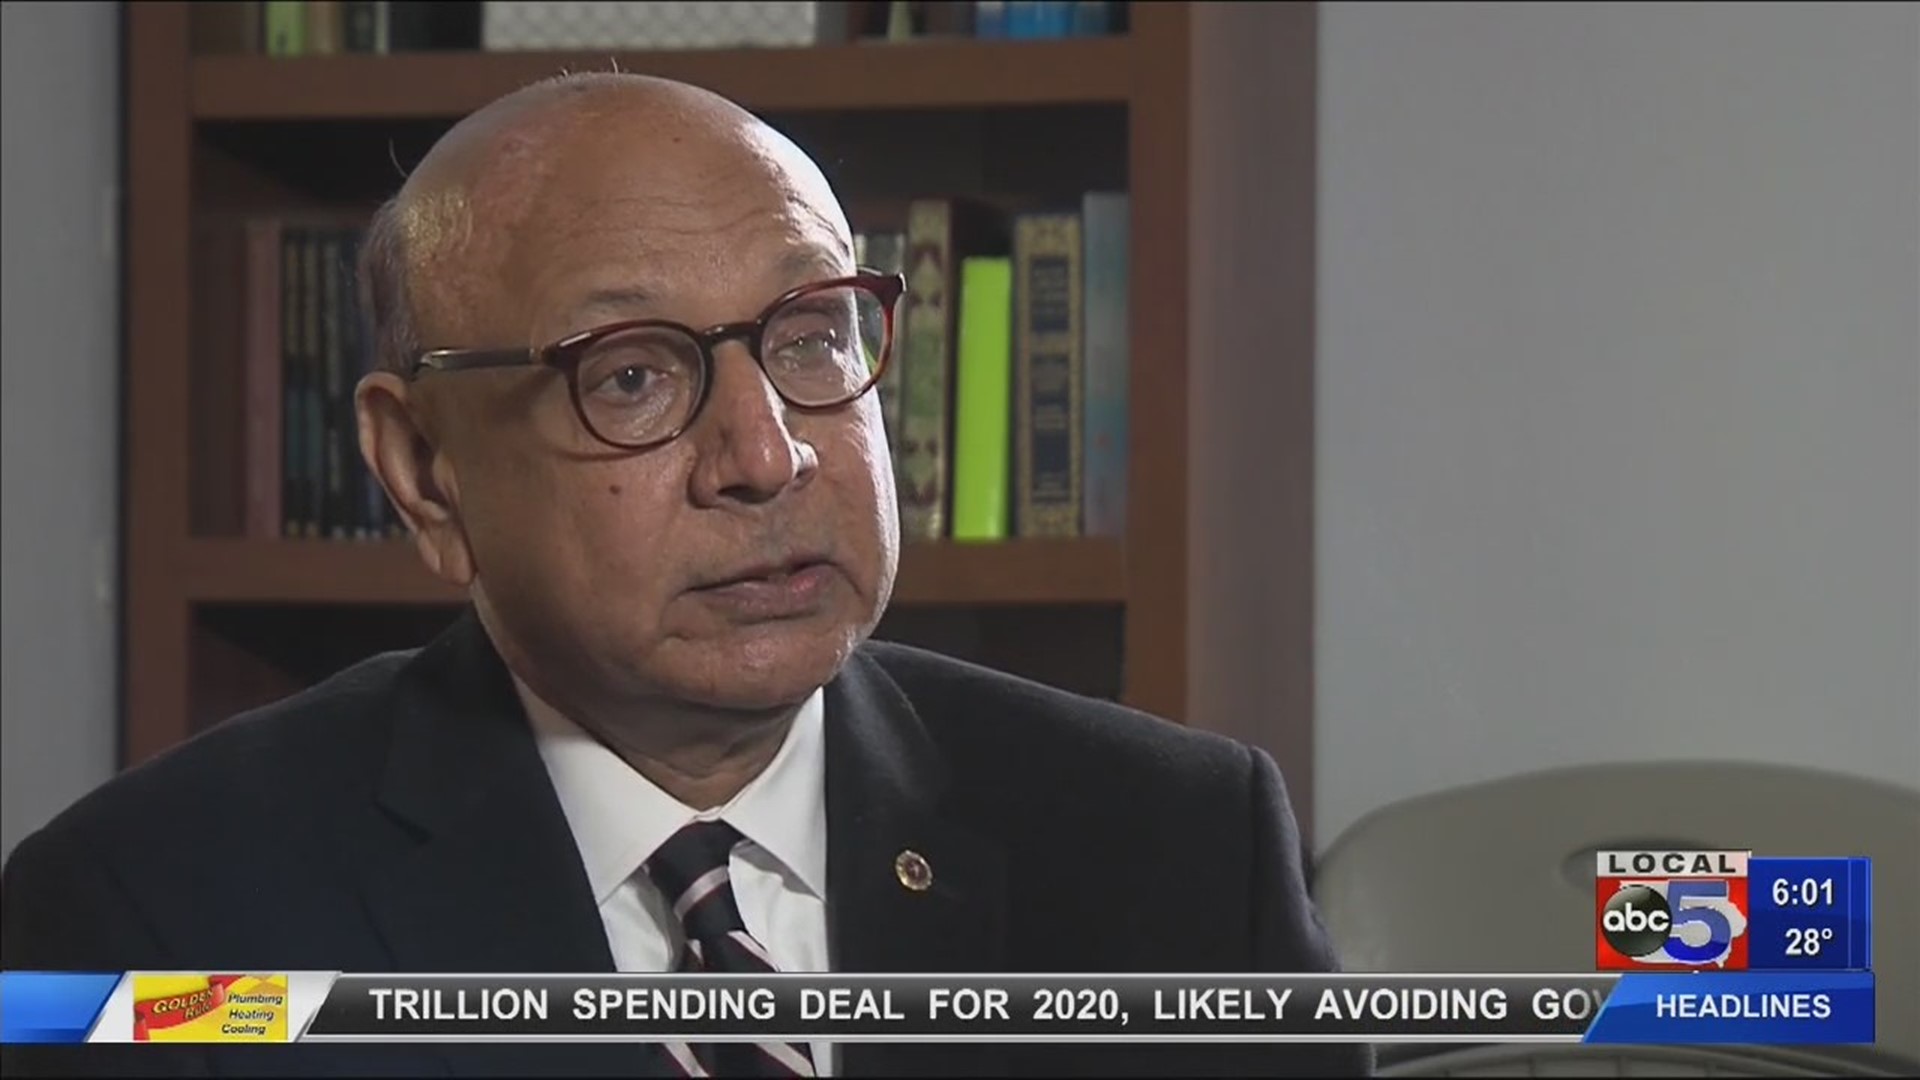 ‘We are proud to be part of this nation’: A conversation with Gold Star father Khizr Khan